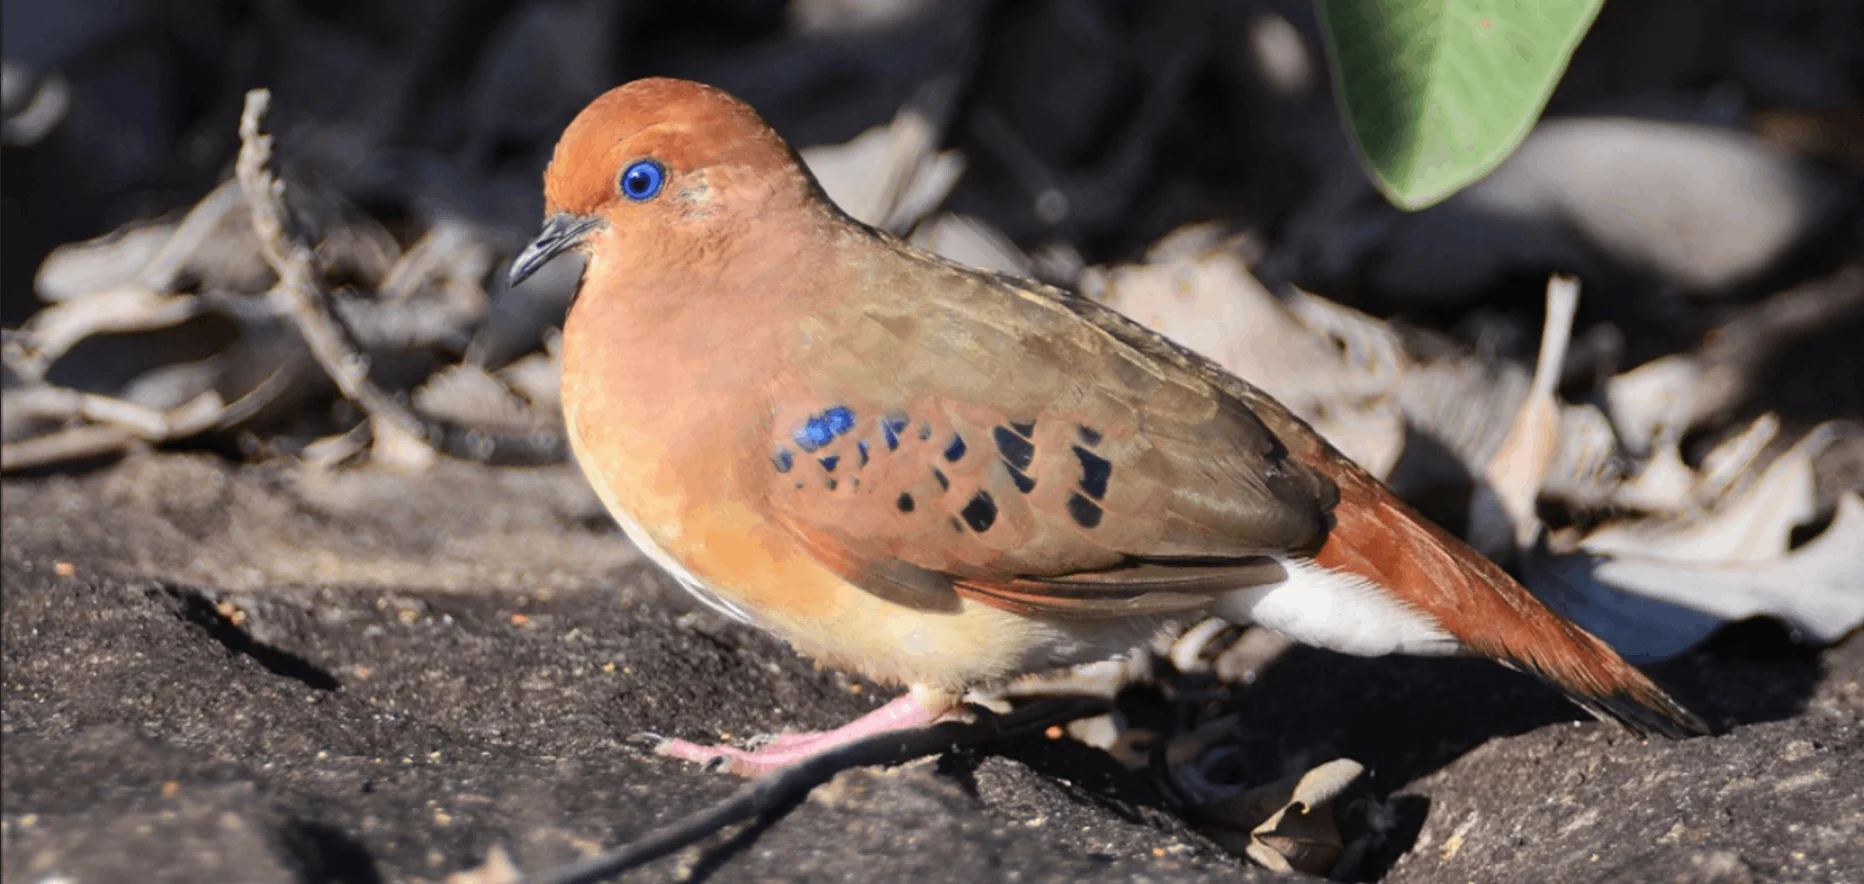 A close-up of an adult Blue-eyed Ground Dove standing on a rock